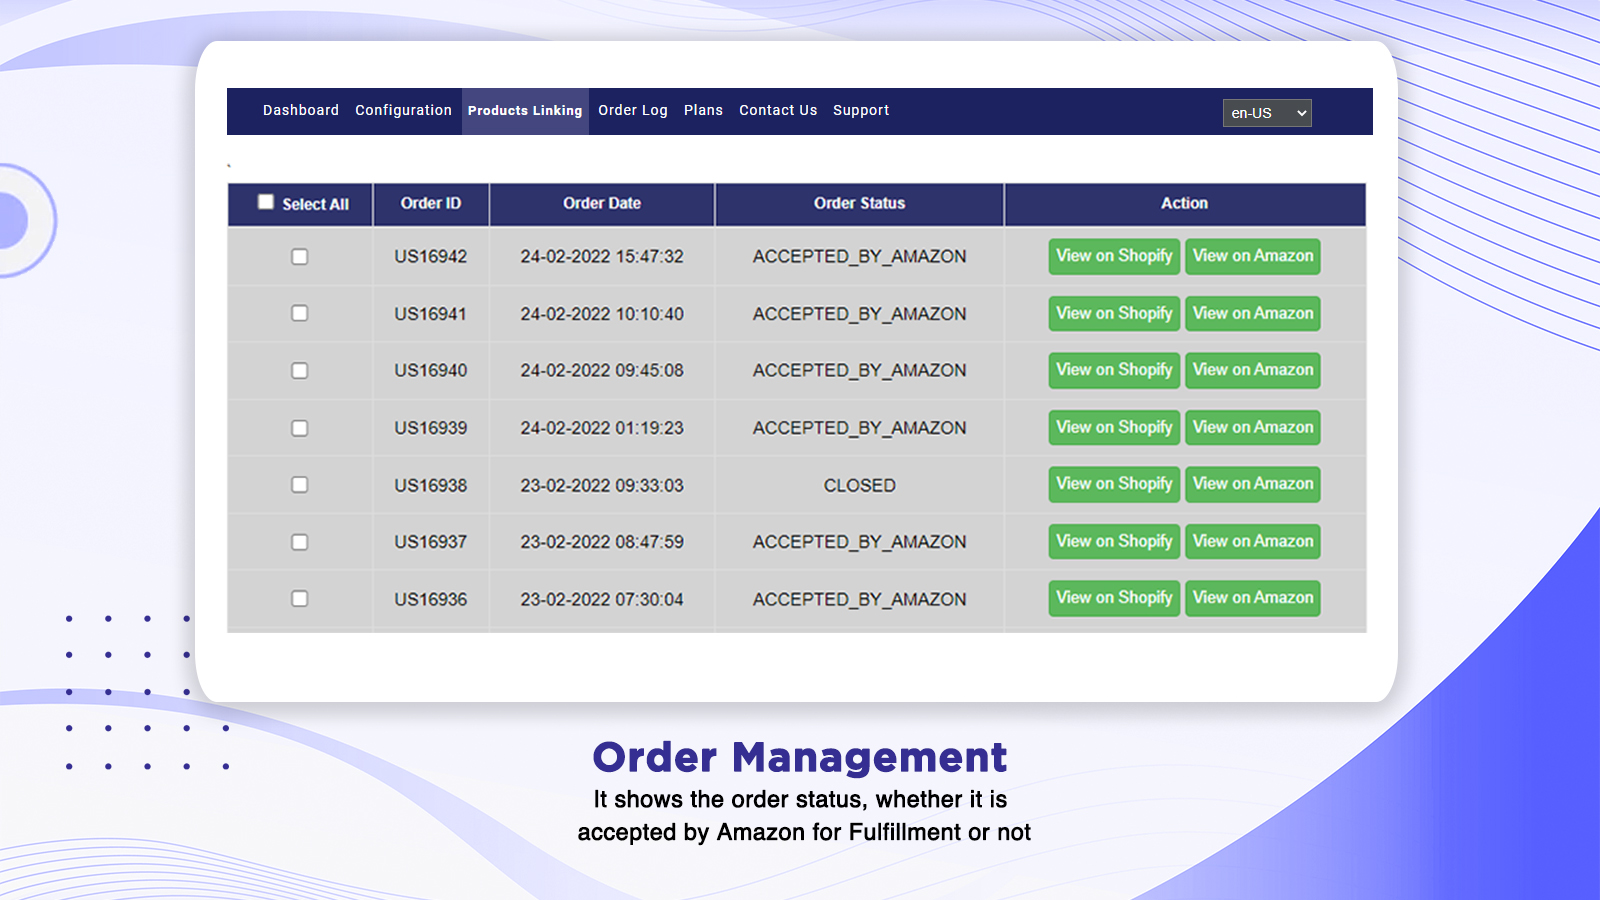 Quick order processing, shipping orders on schedule, and streamlining procedures.